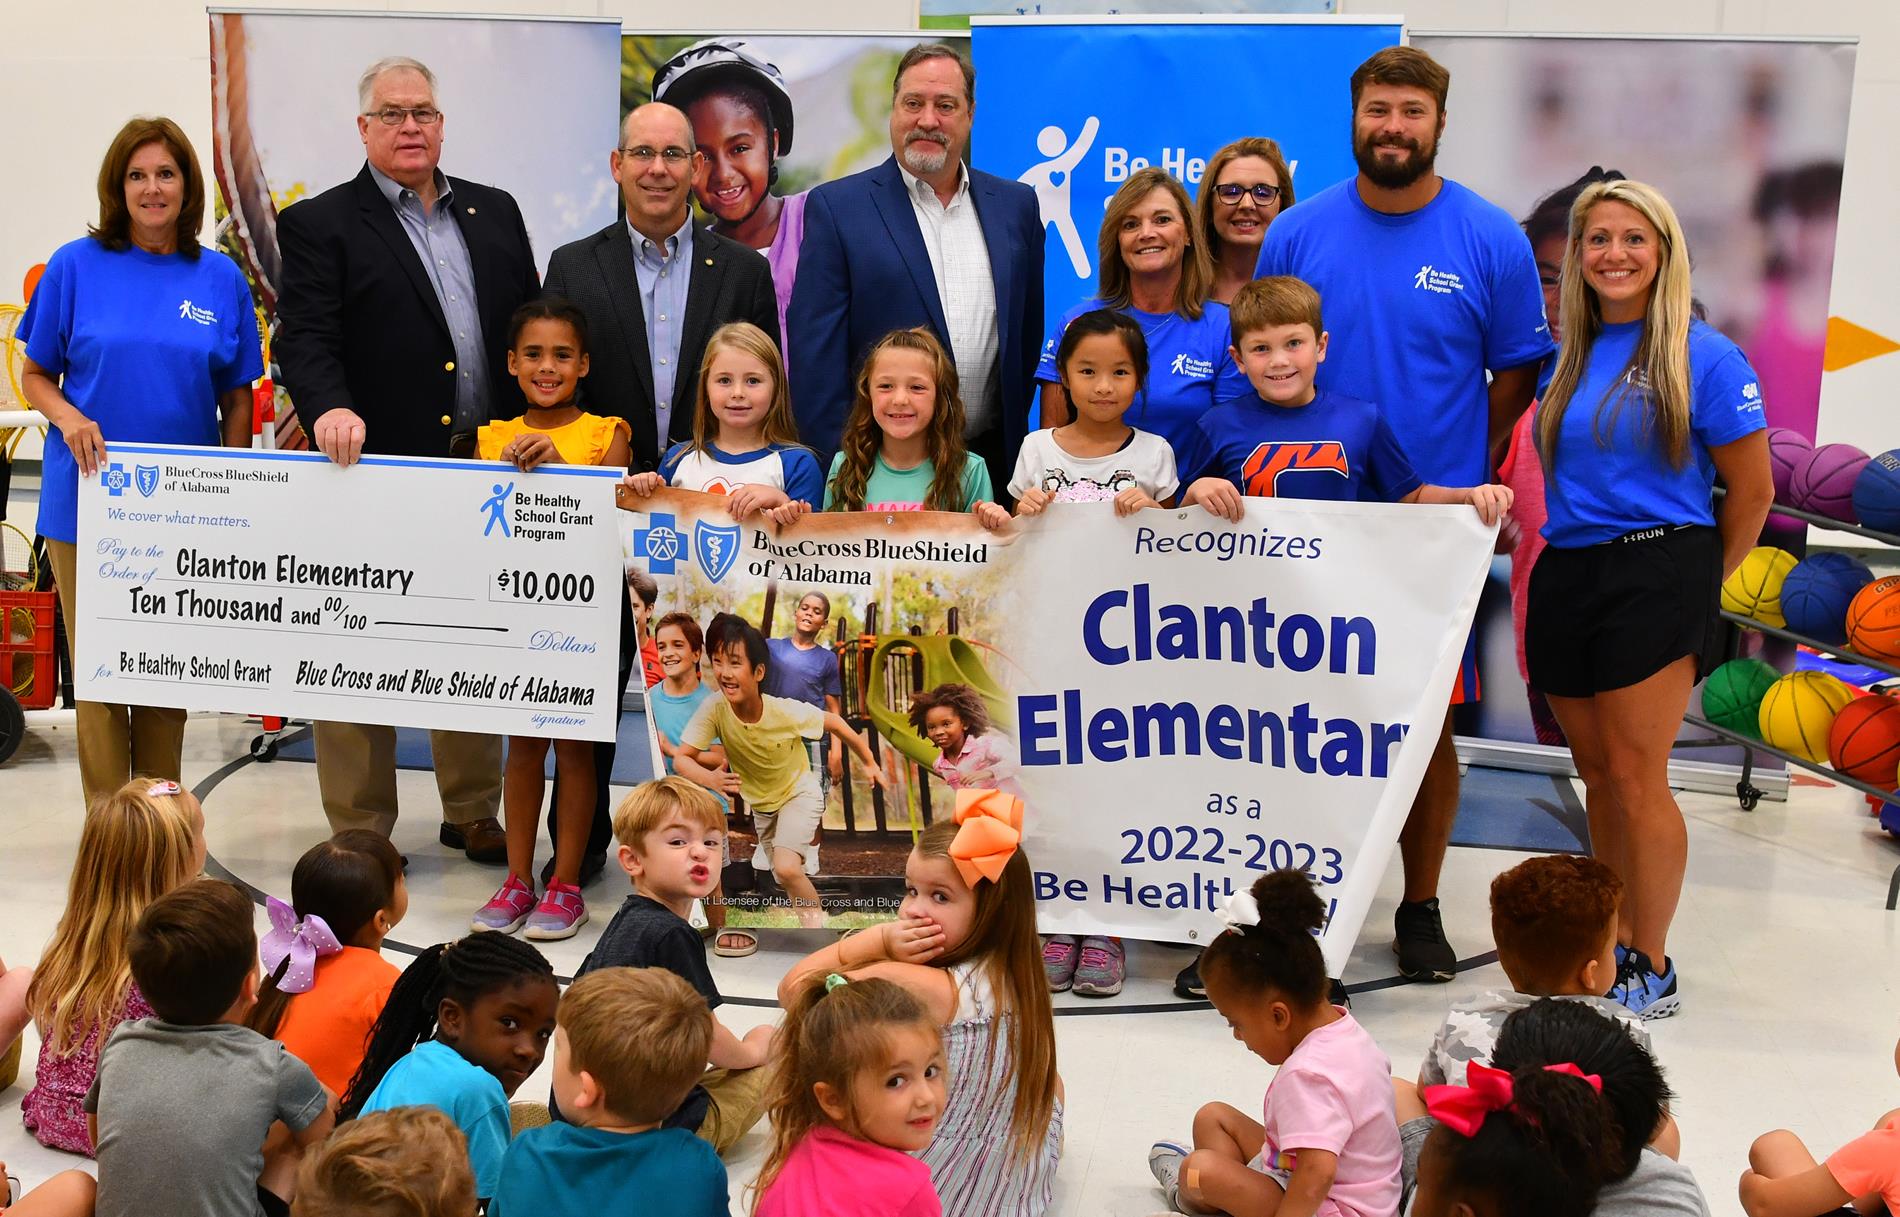 Chilton County Schools thanks Blue Cross and Blue Shield for their support of education!